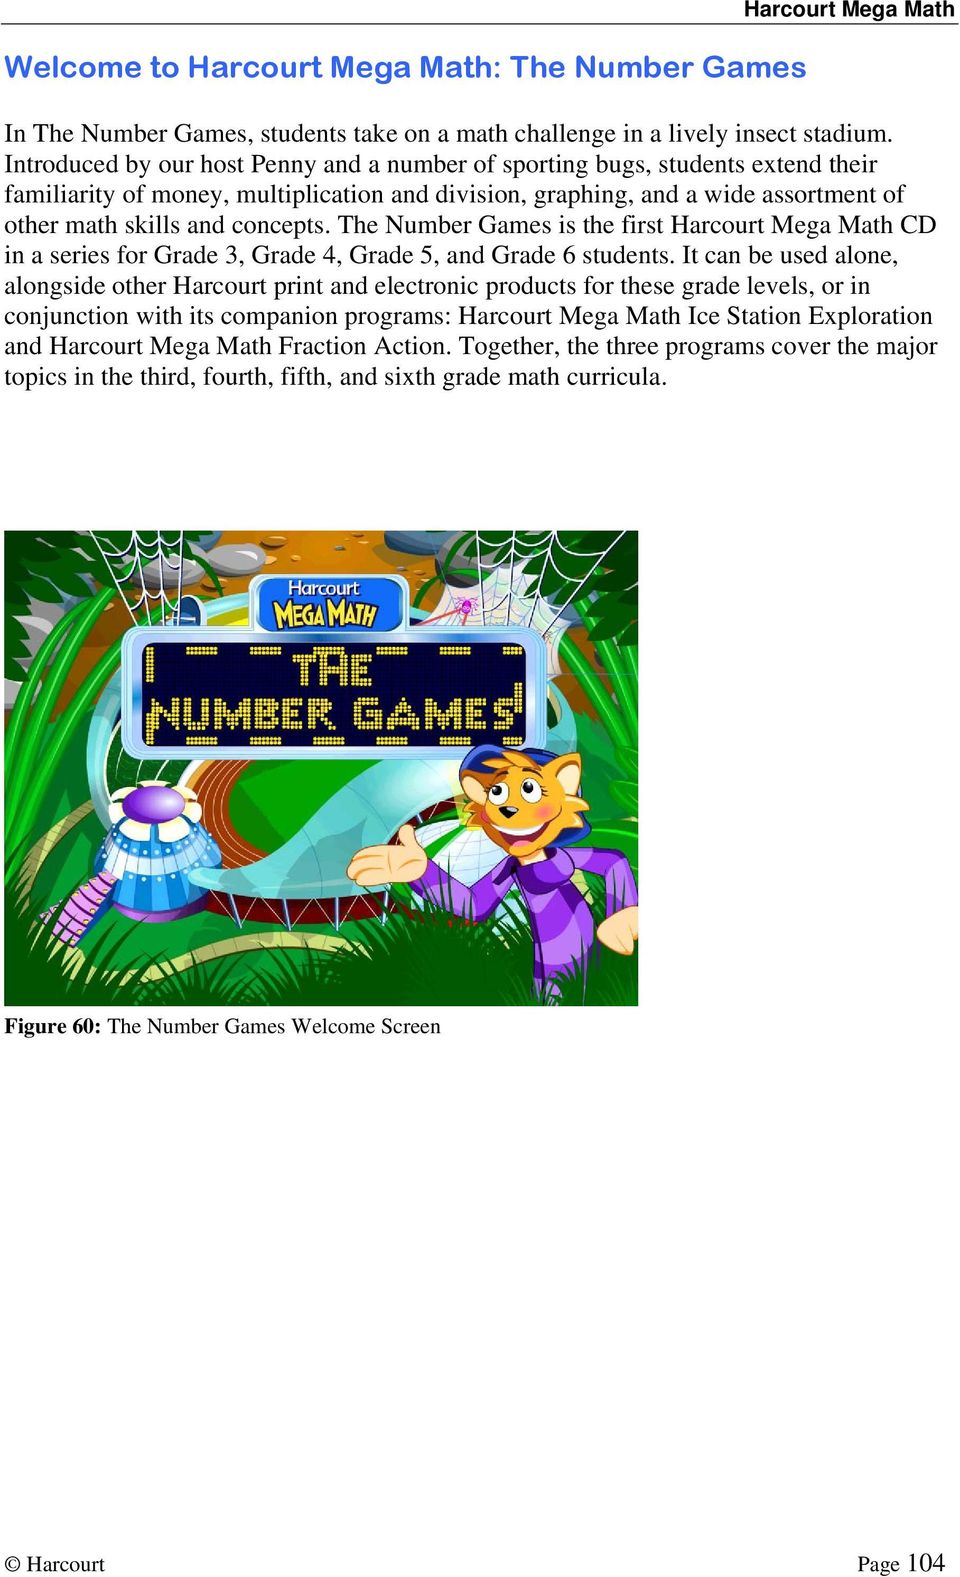 The Number Games is the first Harcourt Mega Math CD in a series for Grade 3, Grade 4, Grade 5, and Grade 6 students.